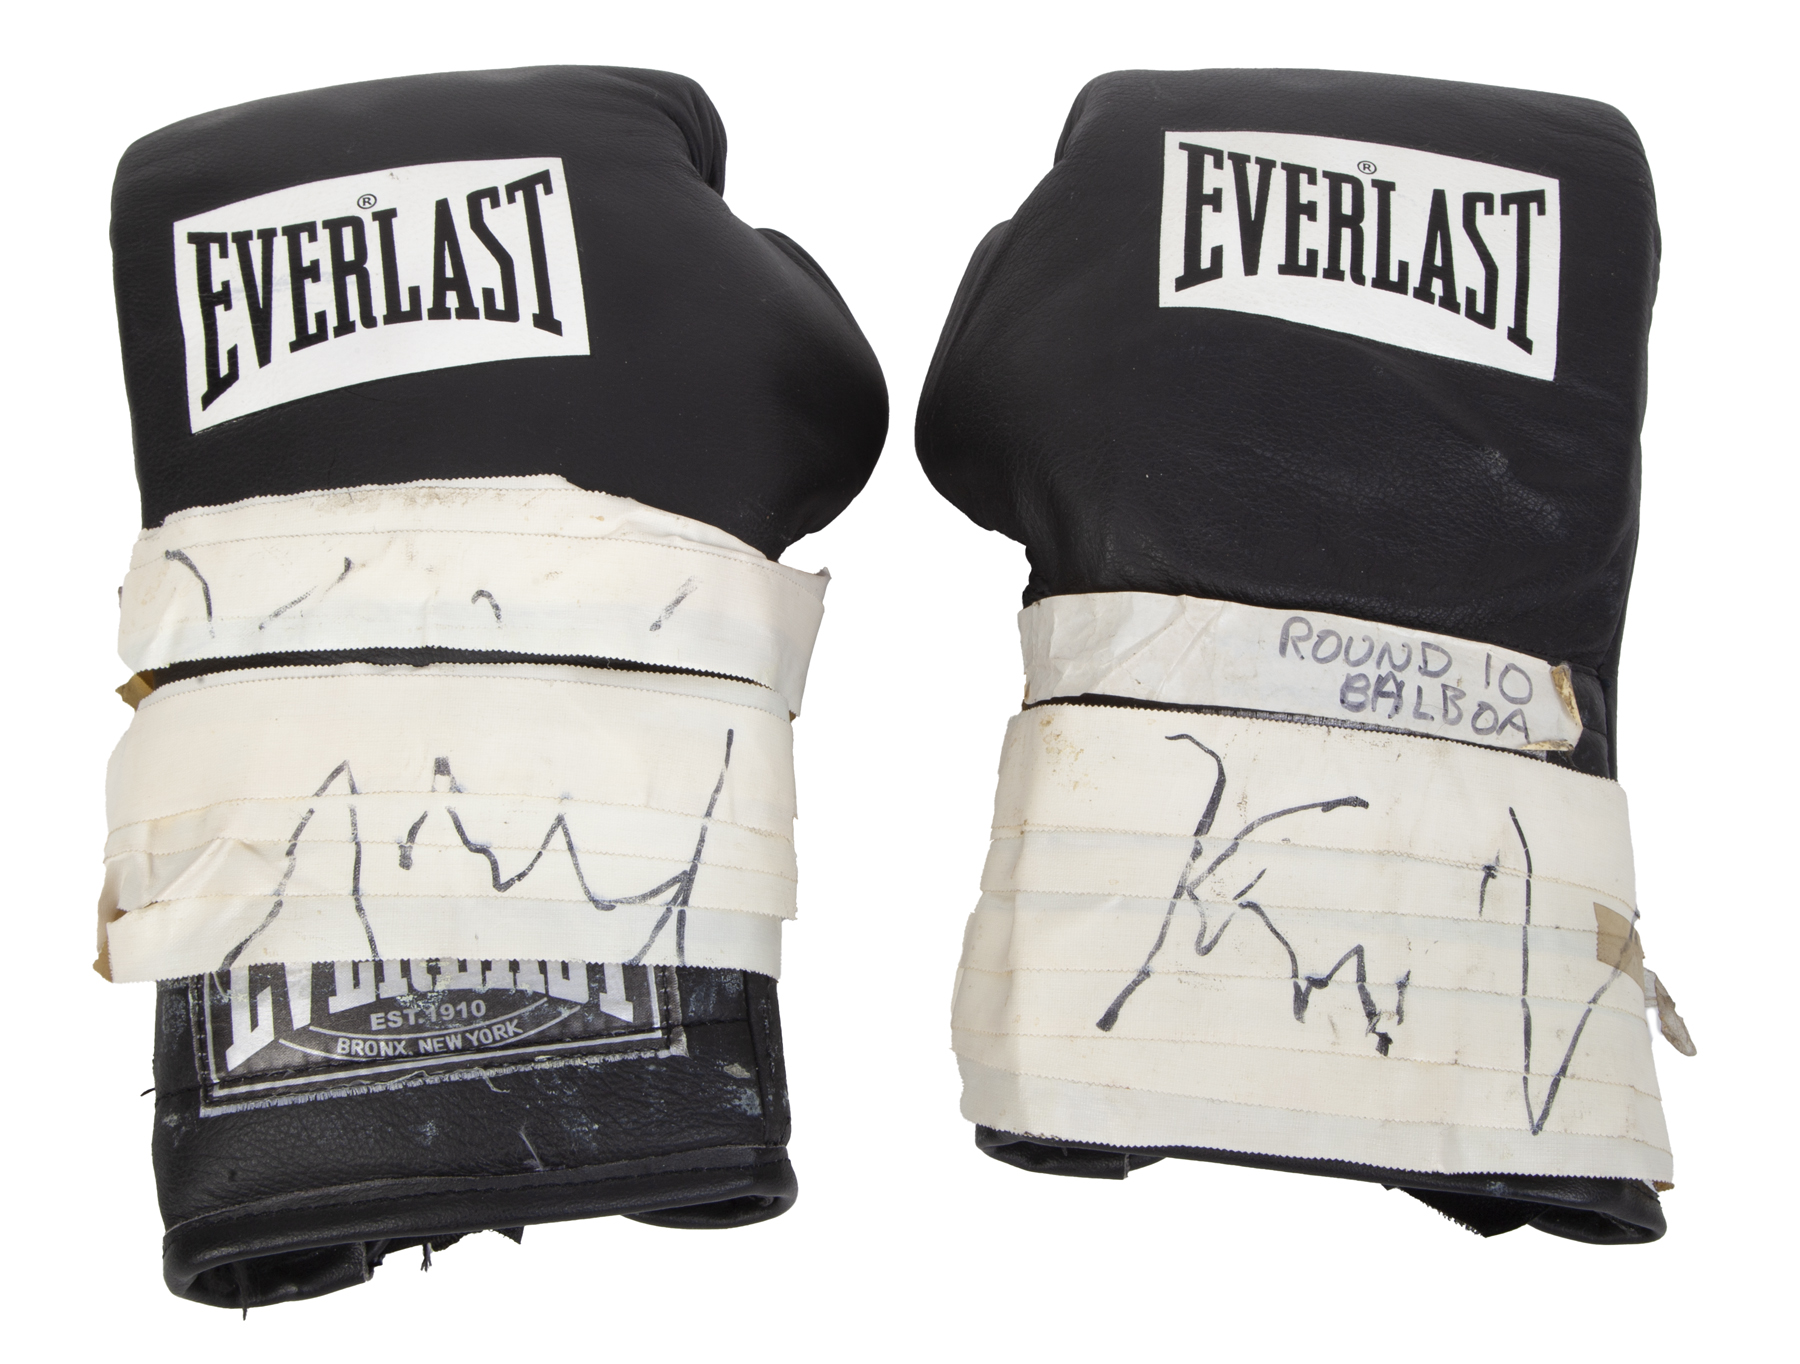 Sylvester Stallone auction